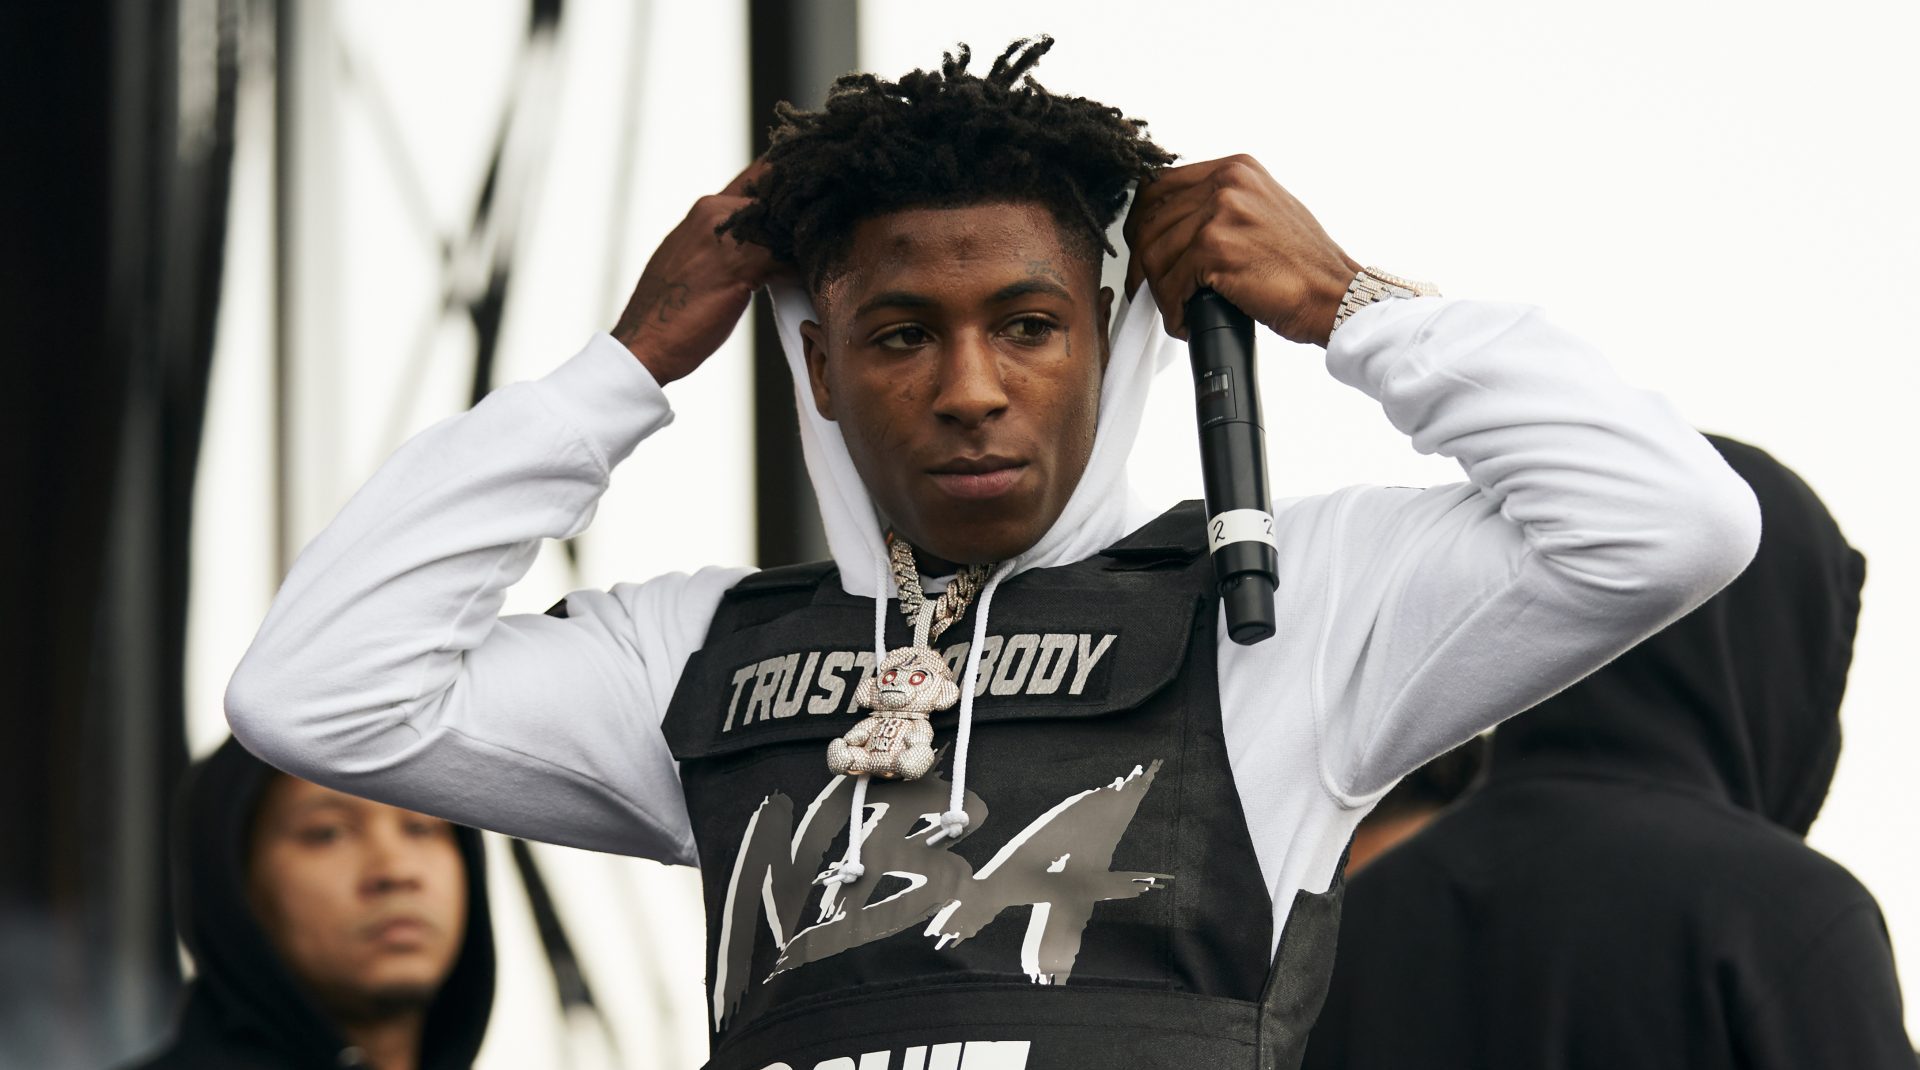 NBA YoungBoy Wants Mormon Baptism After House Arrest, Admits He’s ‘Terrified Of People’ Despite Fame— ‘People Are Cruel’ (WATCH)